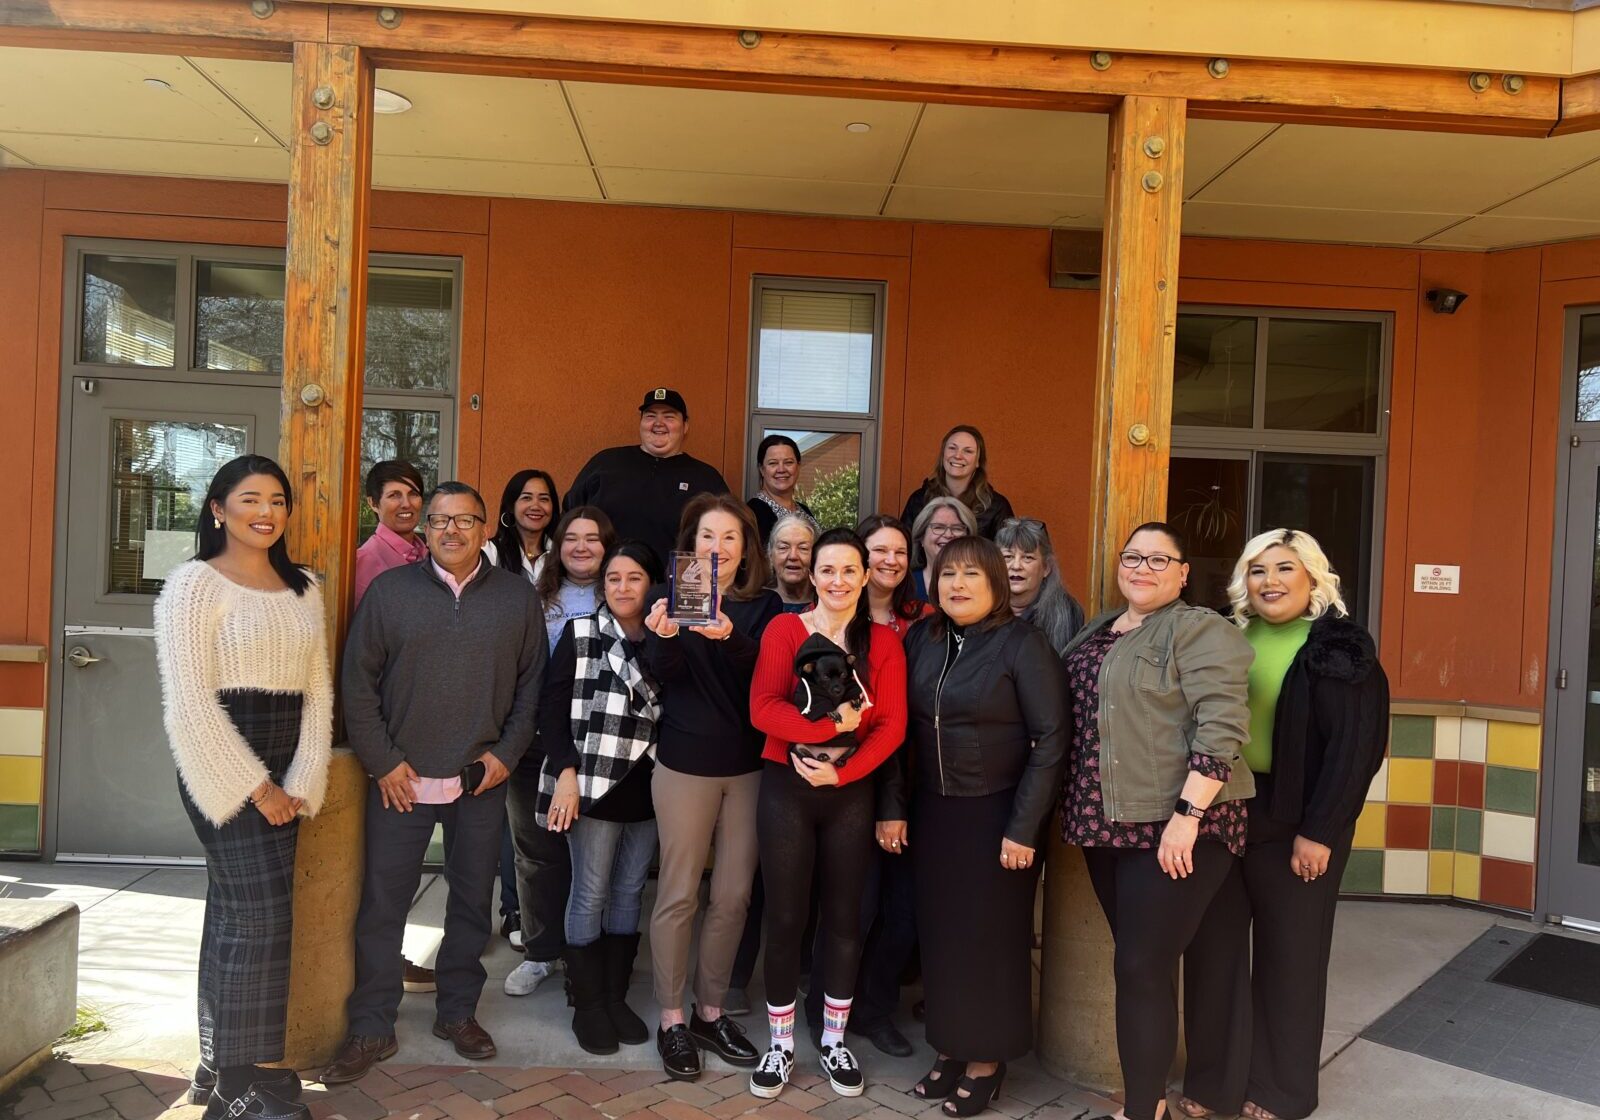 Group photo of 16 diverse volunteers and staff members of the Volunteer Center of Santa Cruz County, standing outside their building. They are smiling and posing together on a sunny day, with one person holding a clear trophy, celebrating their community service achievements.